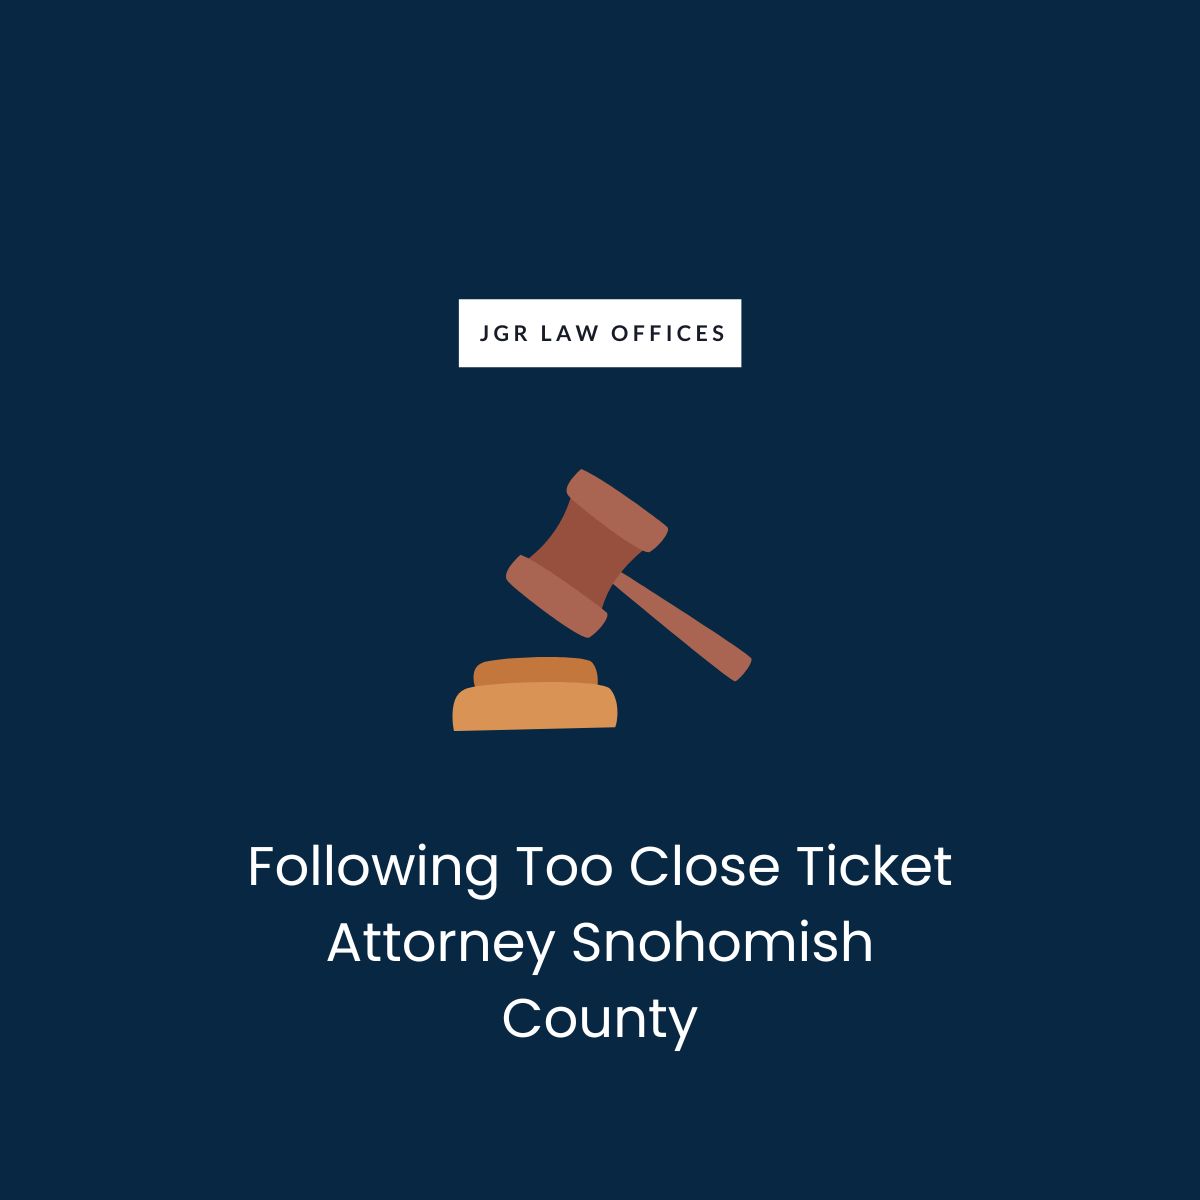 Following Too Close Ticket Attorney Snohomish County